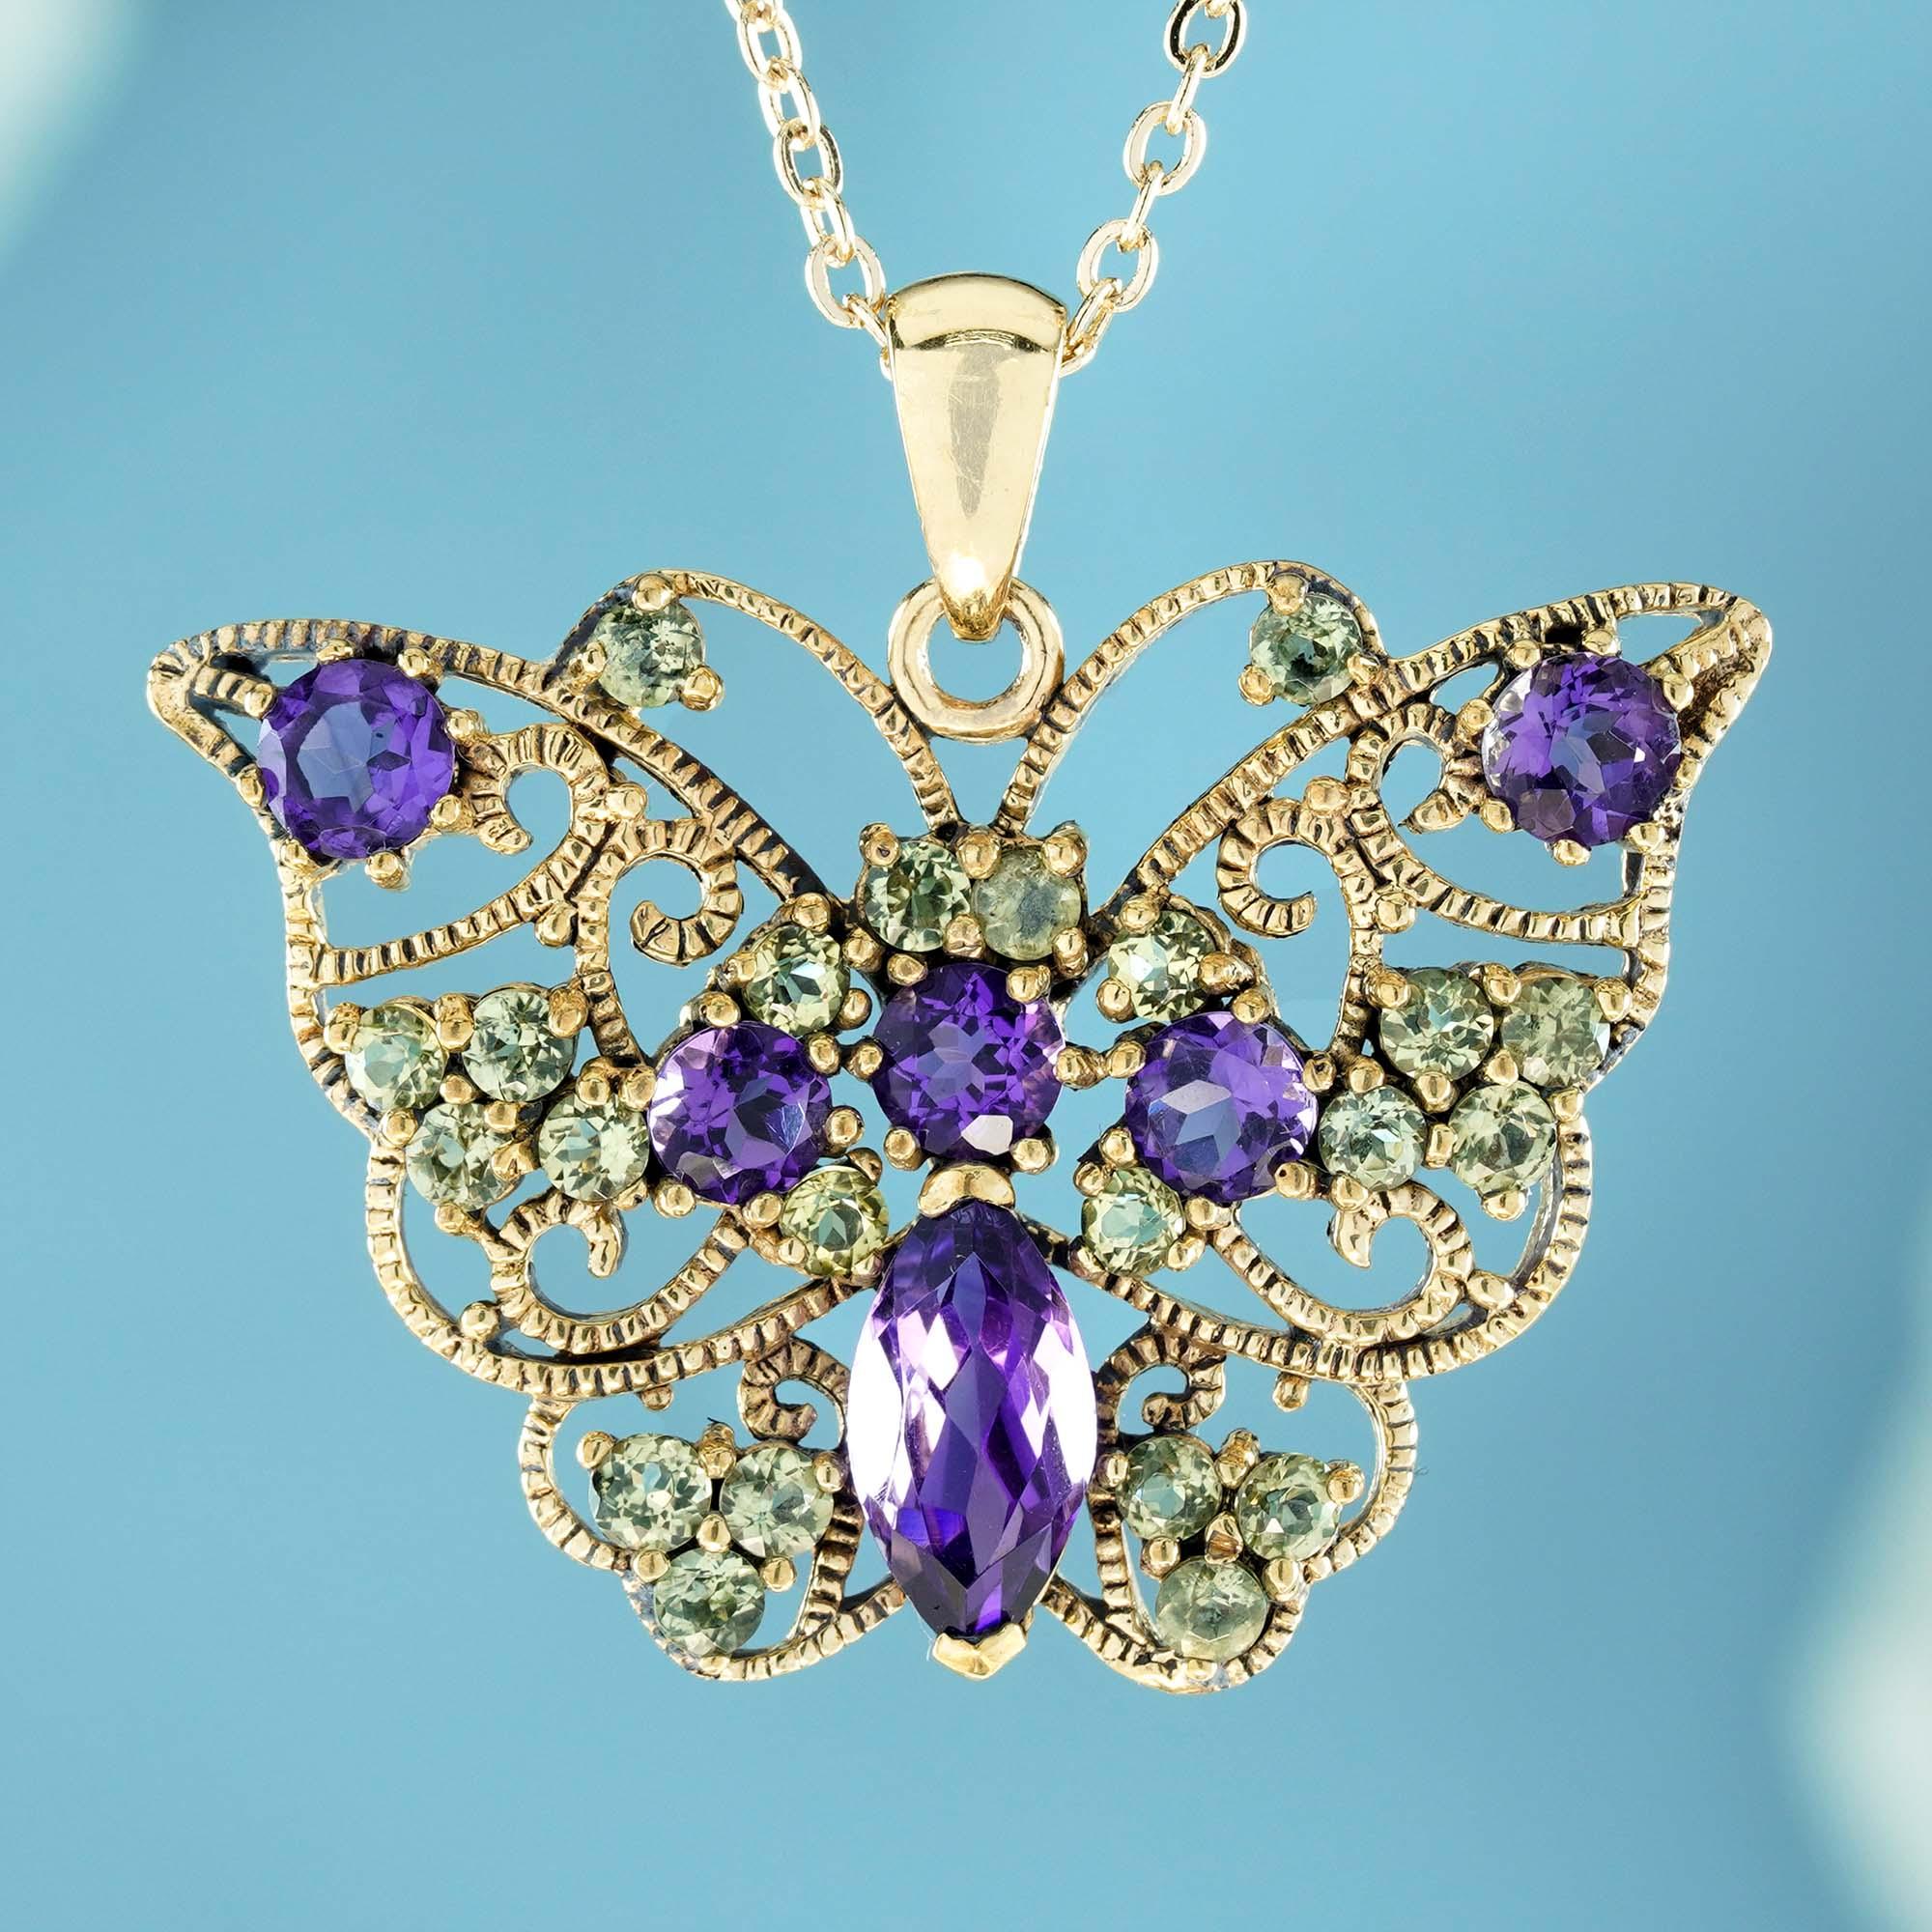 The elegant 24.06 carat vintage-style butterfly pendant crafted from natural amethysts and peridots, set in solid yellow gold. The butterfly has open milgrain wings with delicate veins, its body formed from  a larger marquise purple amethyst. Its